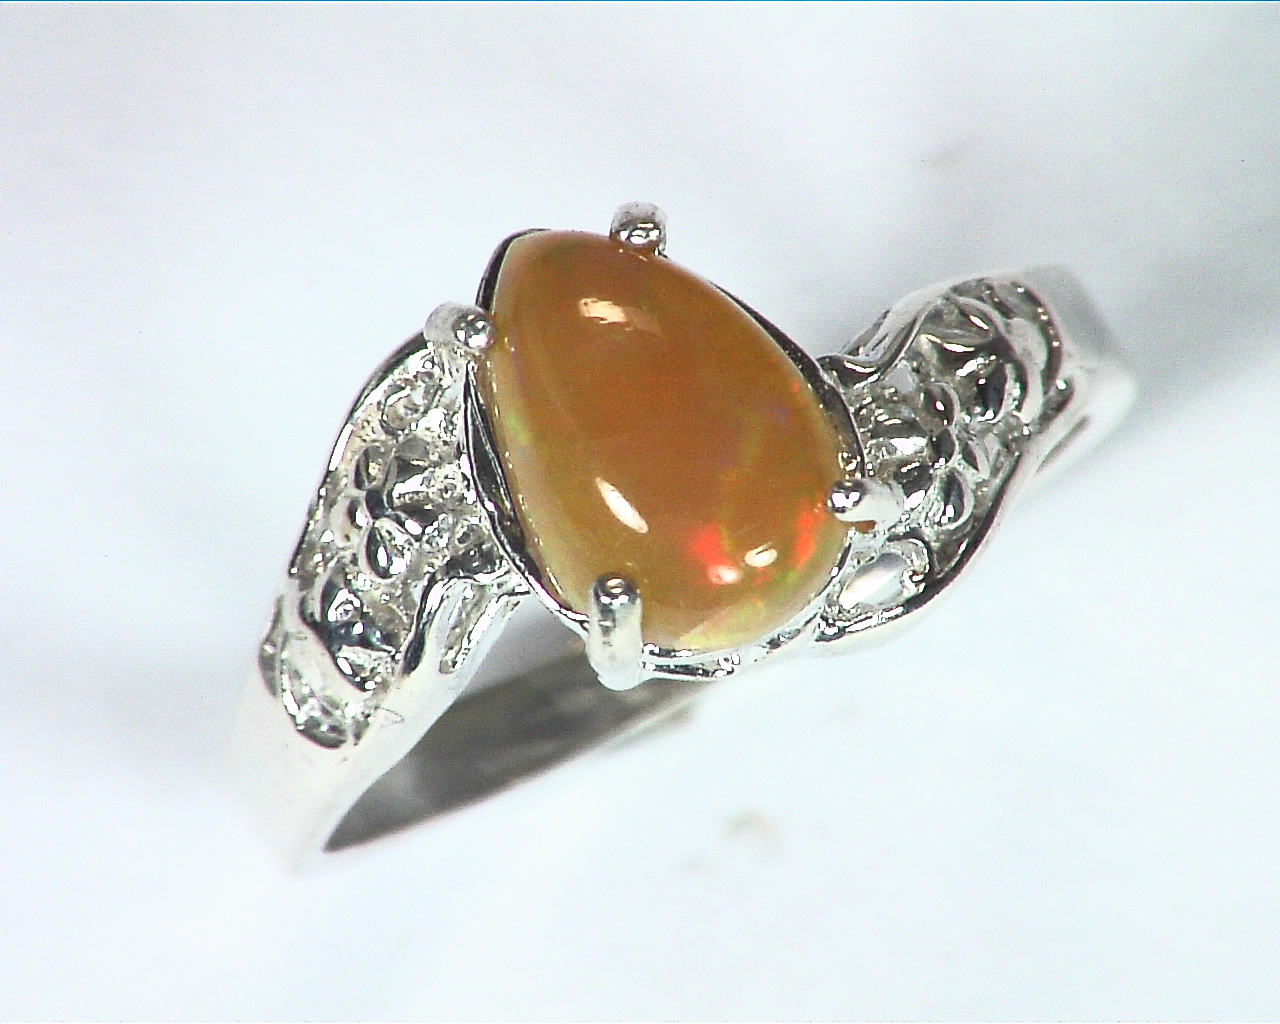 Opal (Mexican) Genuine Gemstone in Sterling silver Ring RSS,600 1